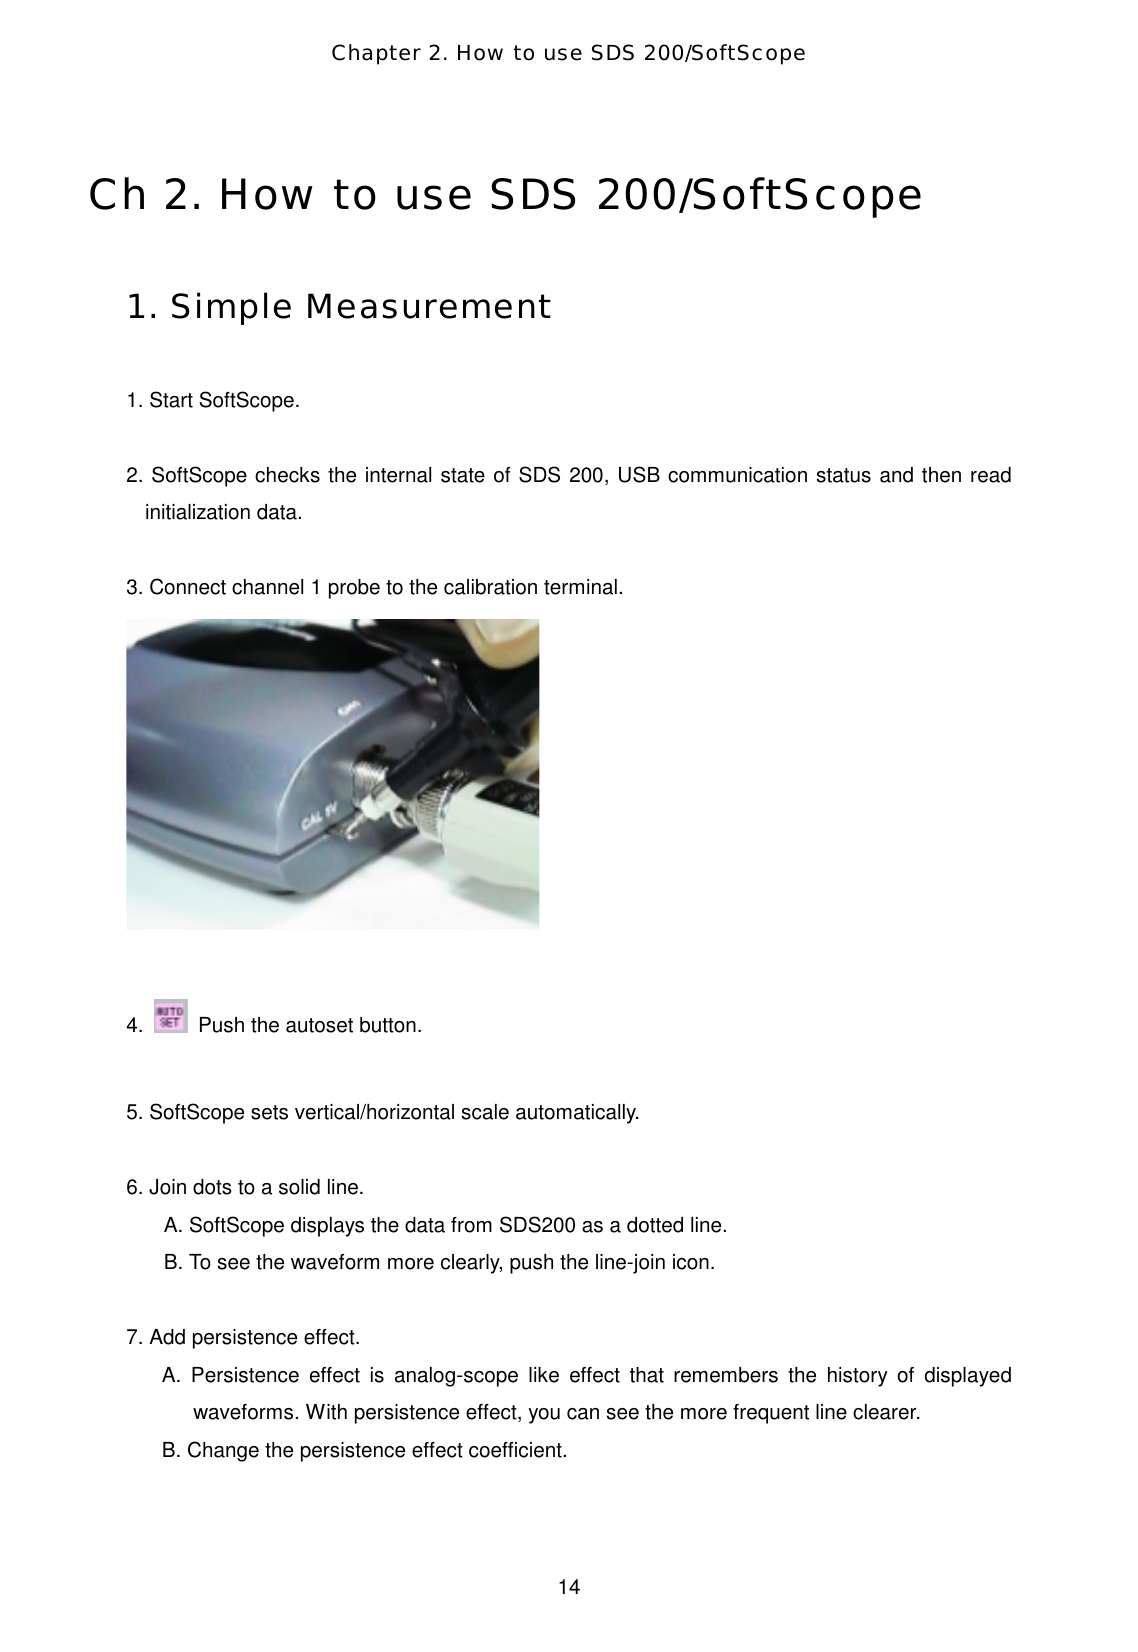 Chapter 2. How to use SDS 200/SoftScope  14 Ch 2. How to use SDS 200/SoftScope  1. Simple Measurement  1. Start SoftScope.  2. SoftScope checks the internal state of SDS 200, USB communication status and then read initialization data.  3. Connect channel 1 probe to the calibration terminal.   4.    Push the autoset button.    5. SoftScope sets vertical/horizontal scale automatically.  6. Join dots to a solid line. A. SoftScope displays the data from SDS200 as a dotted line. B. To see the waveform more clearly, push the line-join icon.    7. Add persistence effect.   A. Persistence effect is analog-scope like effect that remembers the history of displayed waveforms. With persistence effect, you can see the more frequent line clearer. B. Change the persistence effect coefficient.    